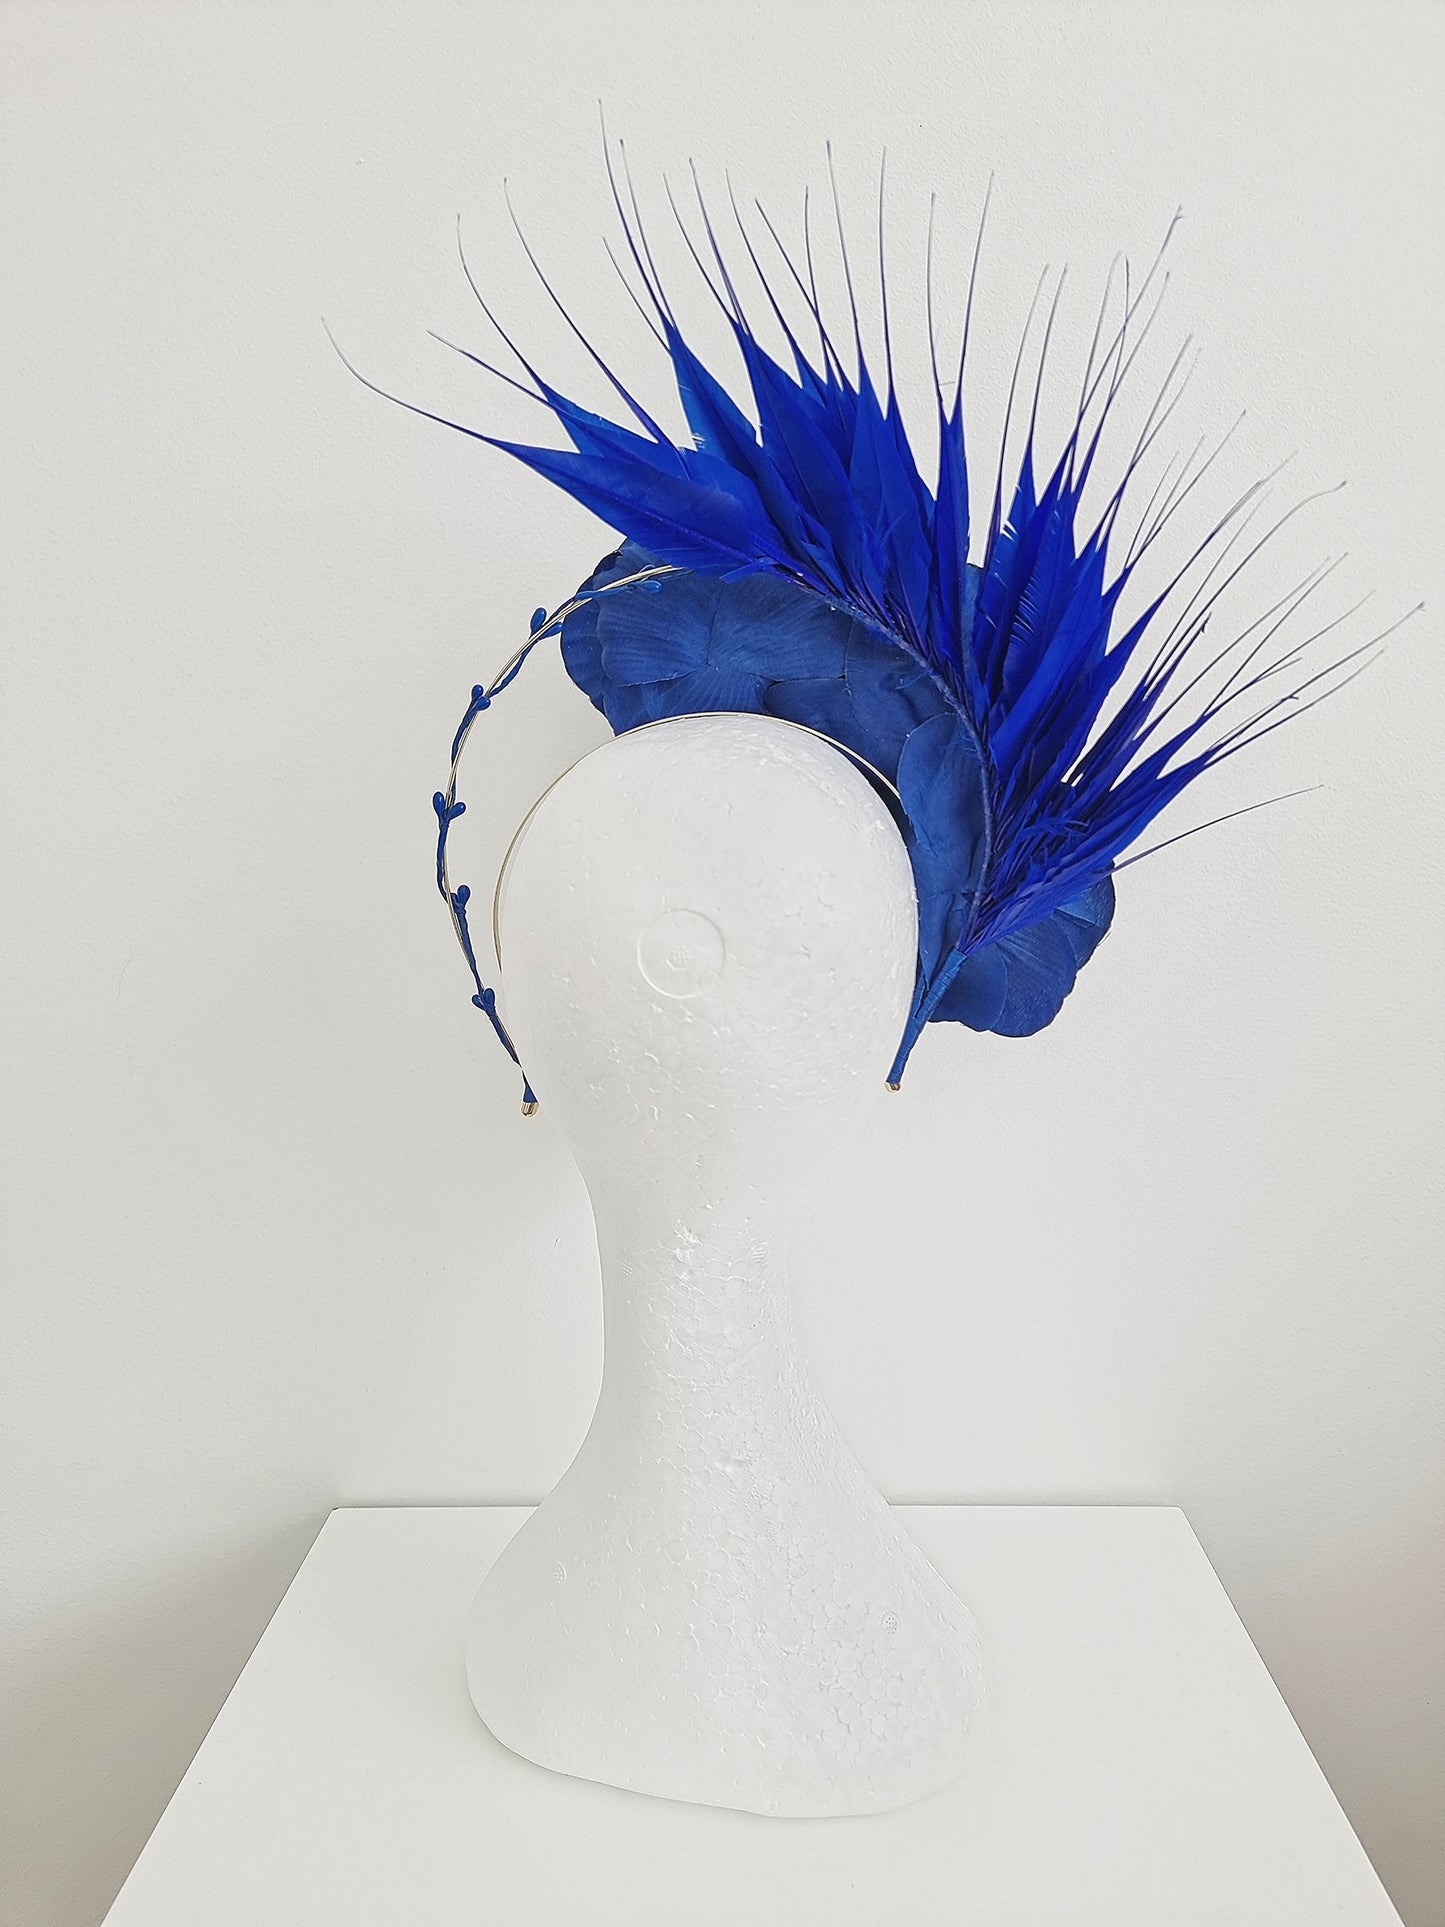 Order  - Miss Kelly. Womens flower and feather halo headband fascinator